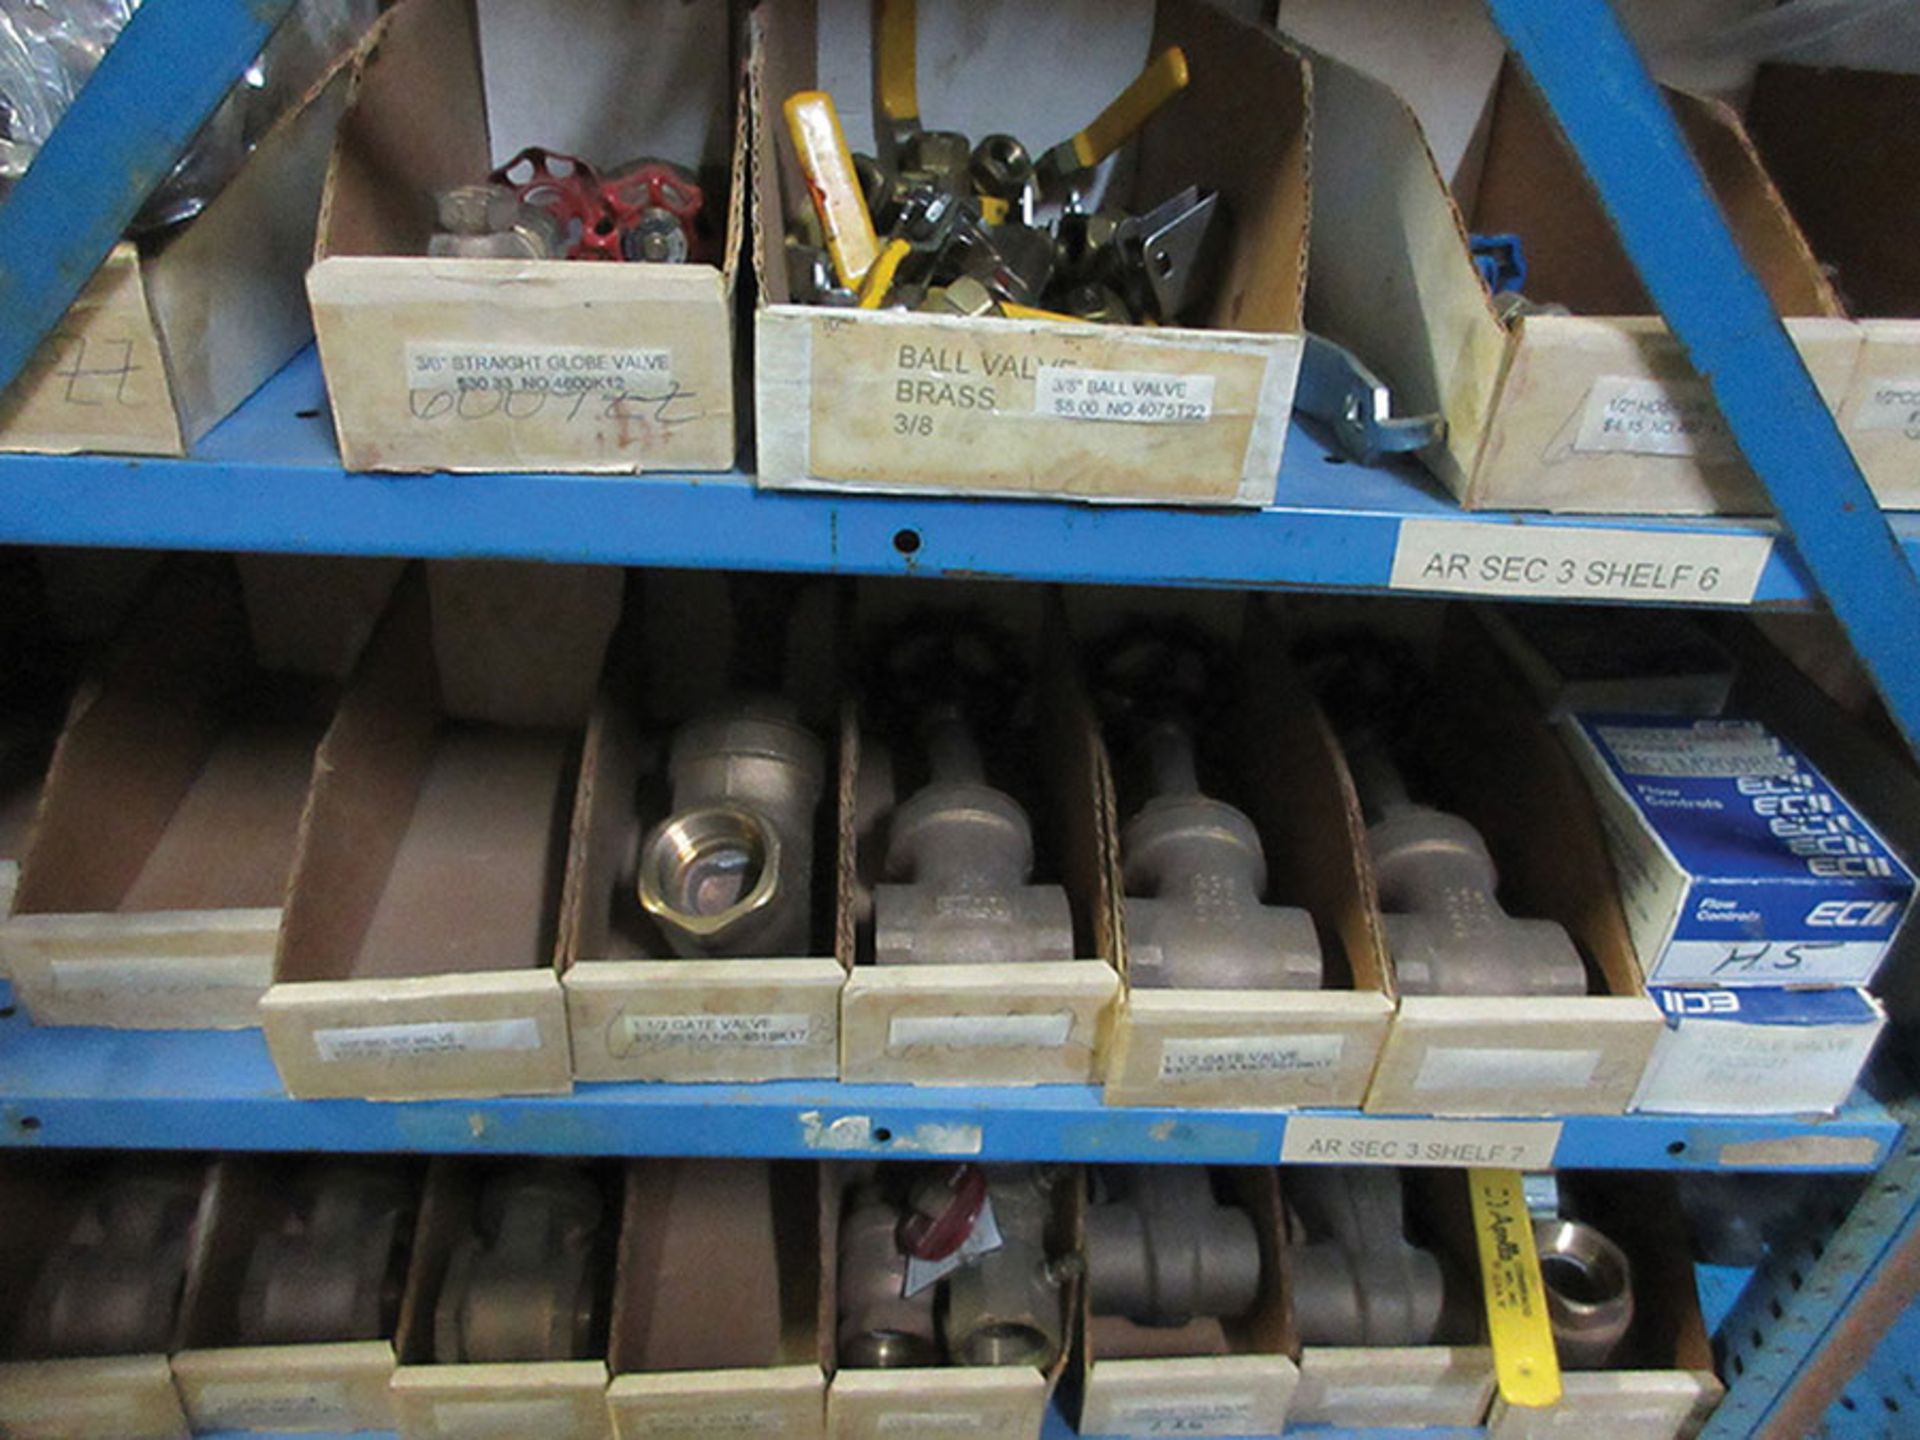 CONTENTS ON LOWER SECTION OF SHELF UNIT: DIE SPRINGS, GATE VALVES, COUPLINGS, UNIONS, AND TEES *** - Image 5 of 8